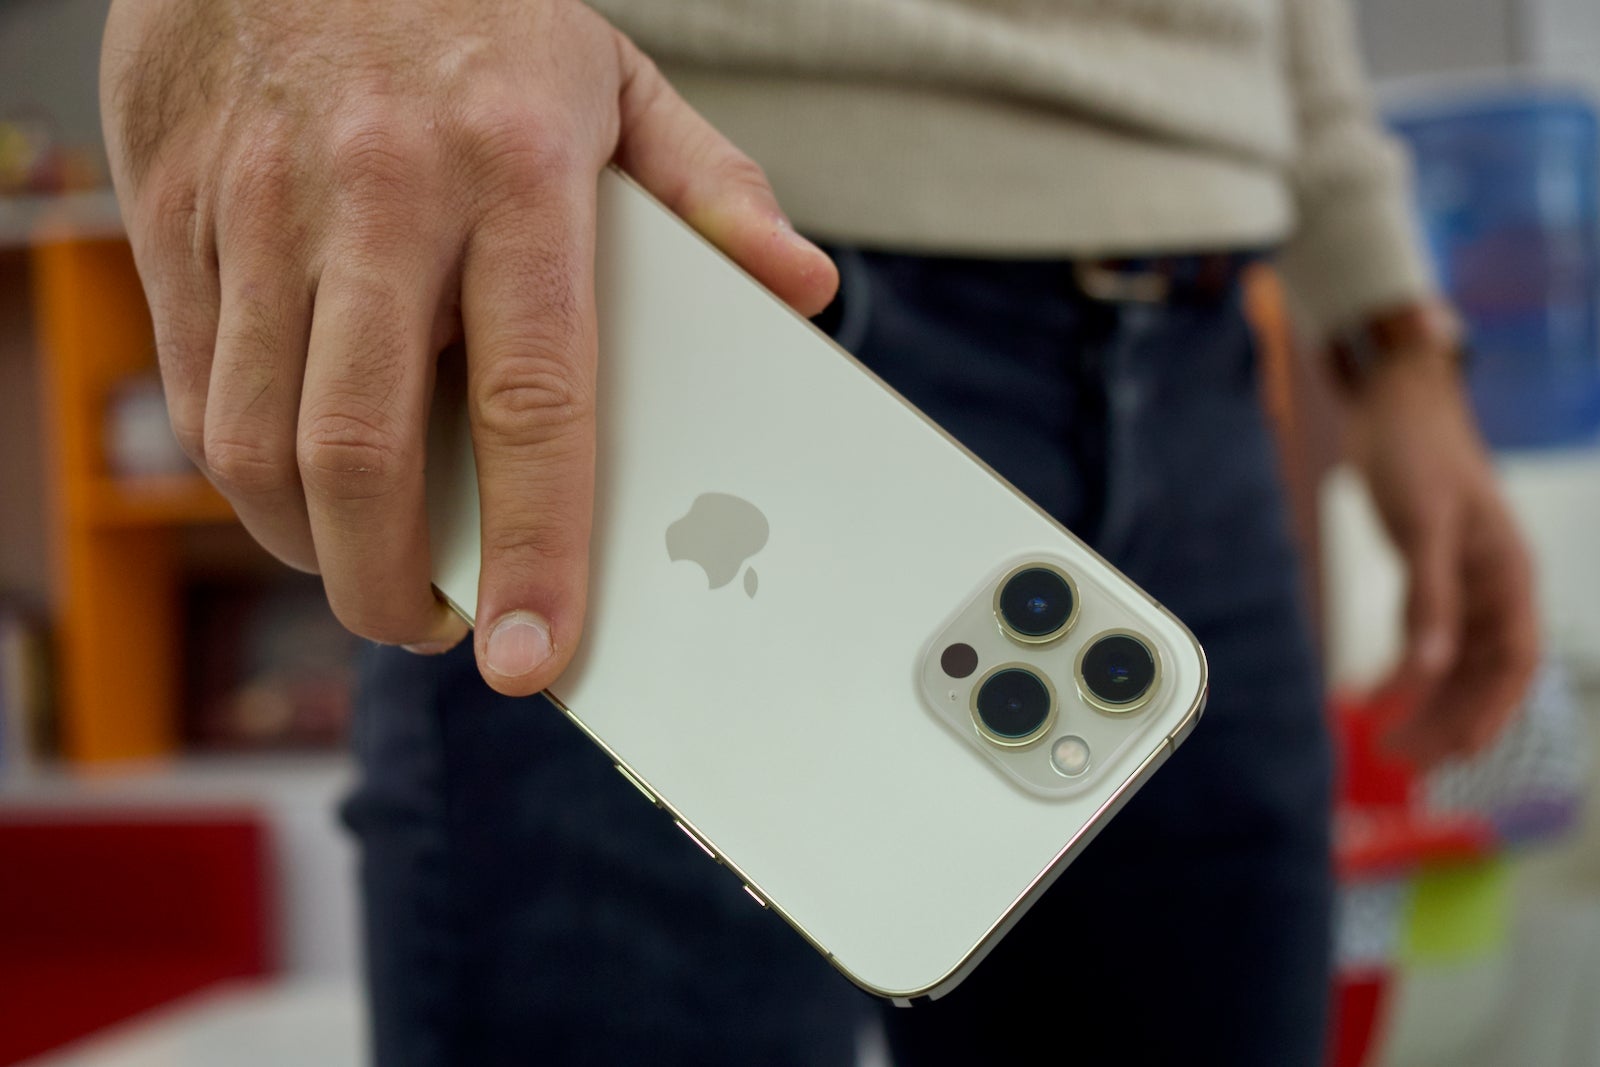 The iPhone 12 Pro Max was the first Apple phone with Sensor-shift - LG takes over most iPhone 13 camera production as sensor-shift tech is tipped again